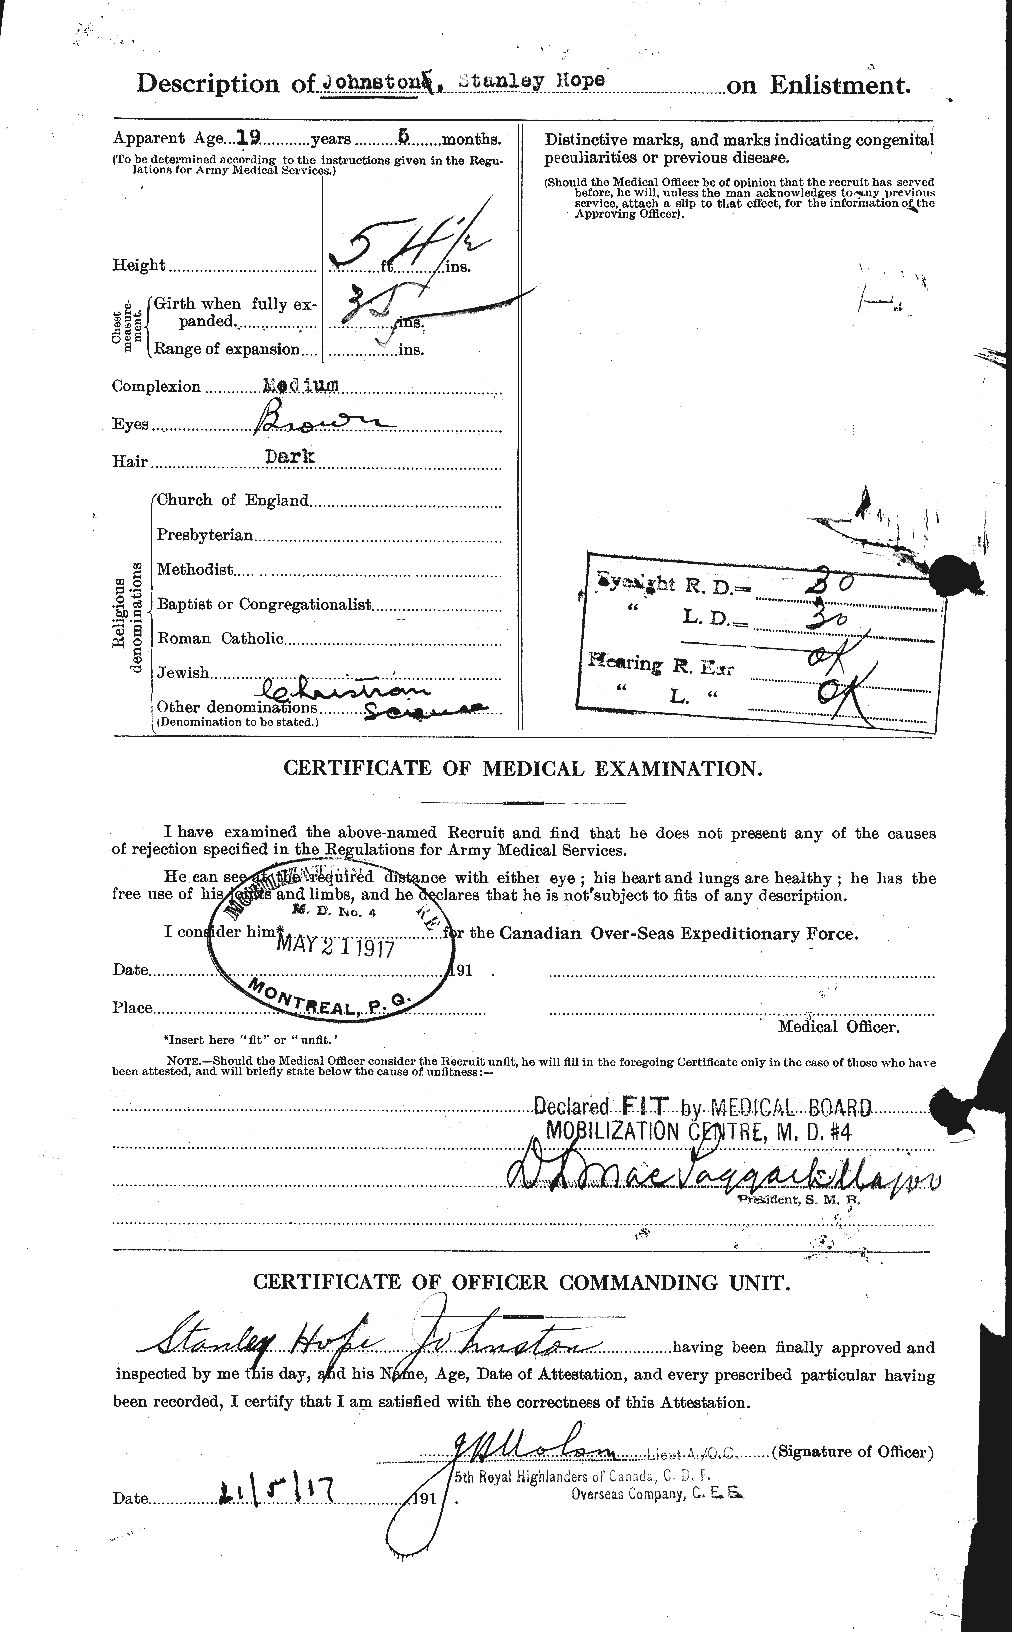 Personnel Records of the First World War - CEF 427103b